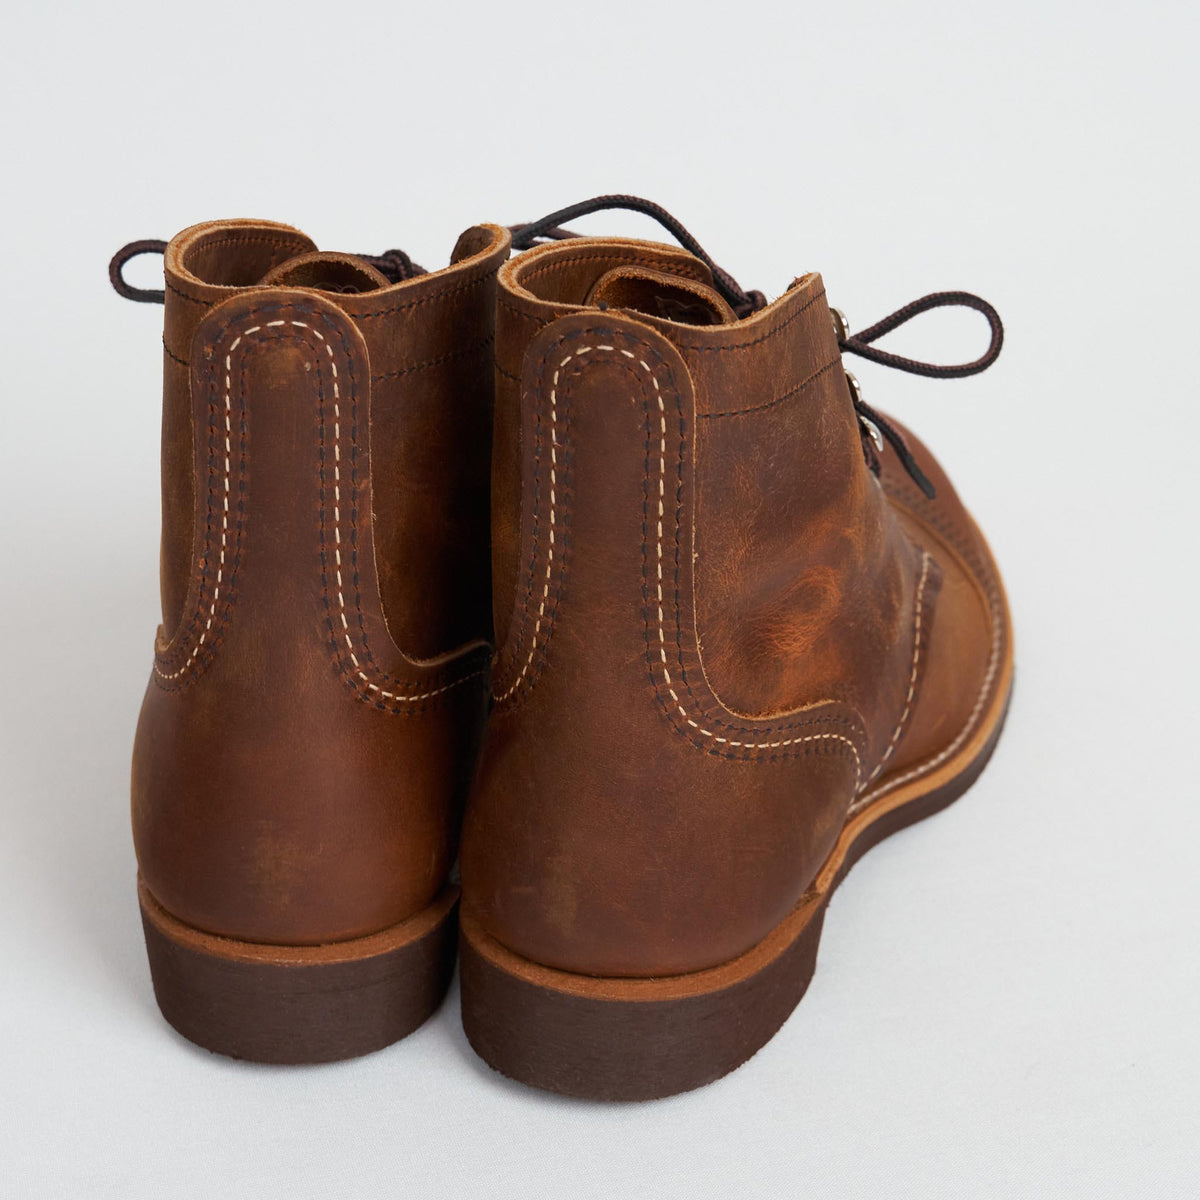 Red Wing Heritage Shoes Iron Ranger 8086, 8085, 8083, 8119, 8084